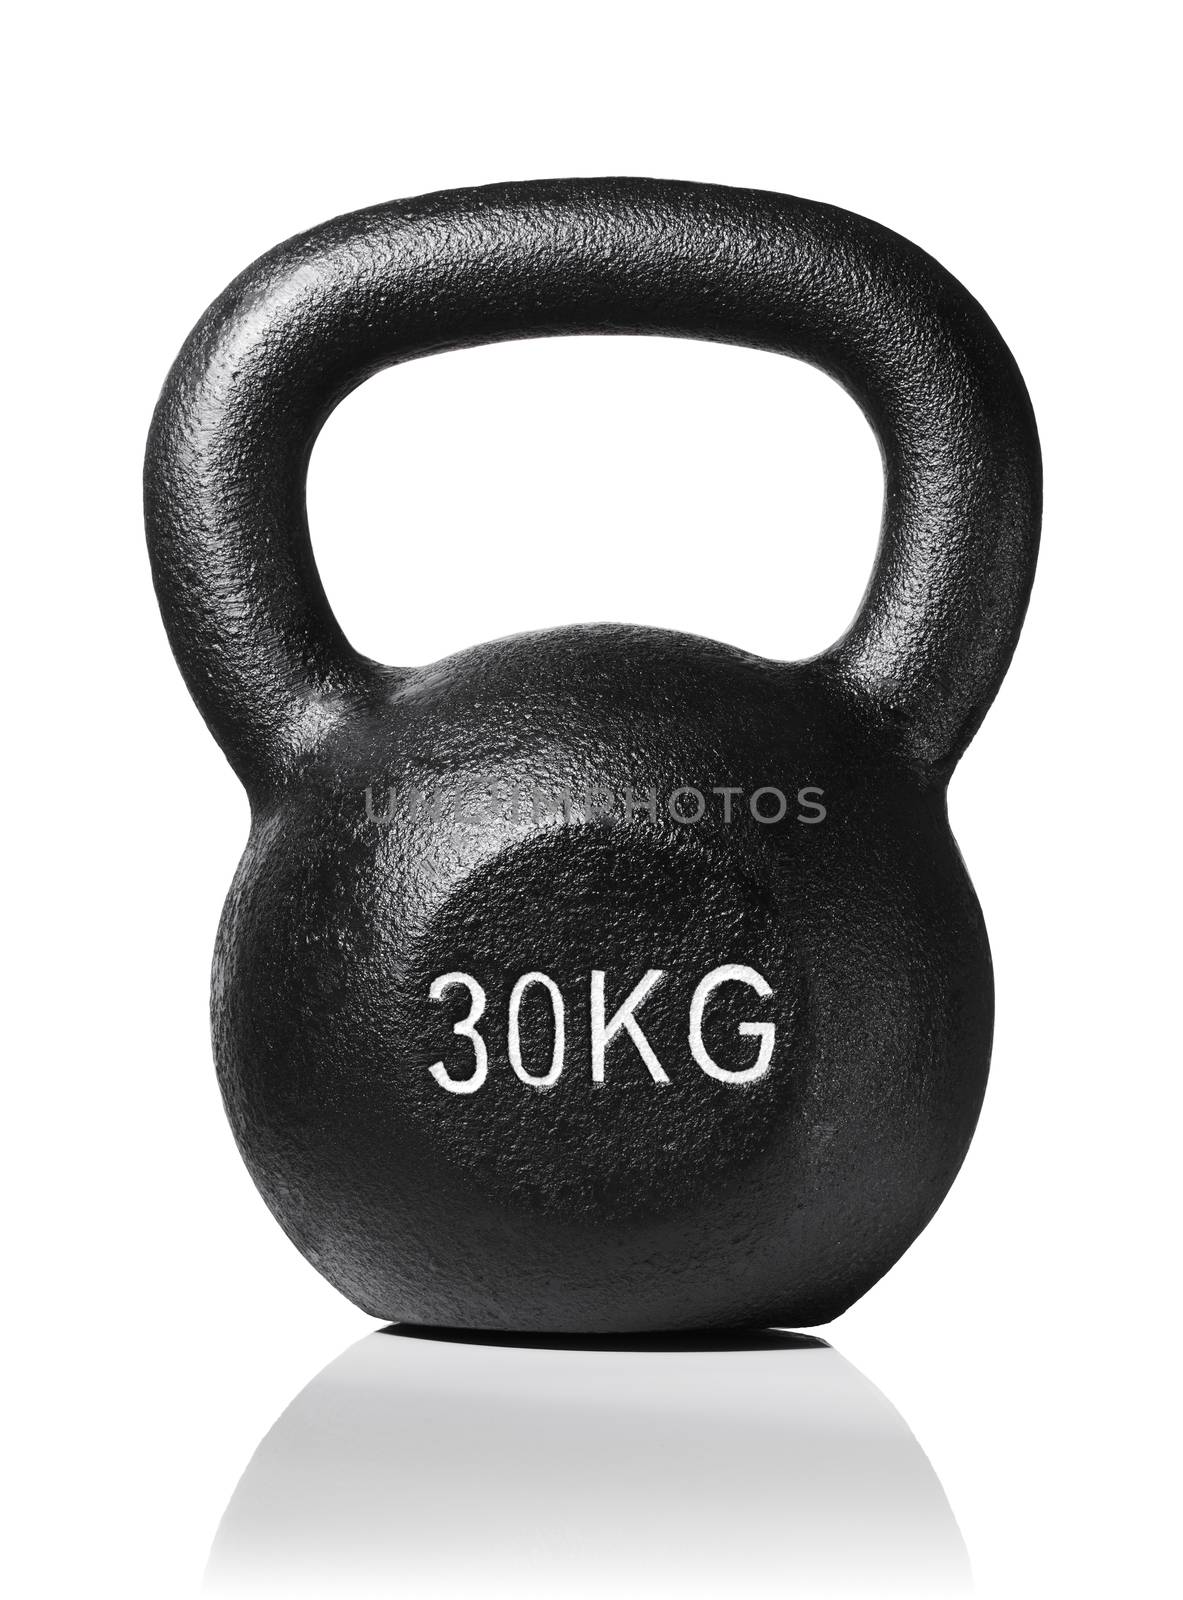 A rough and tough heavy 30 kg 66 lbs cast iron kettlebell isolated on white with natural reflection.